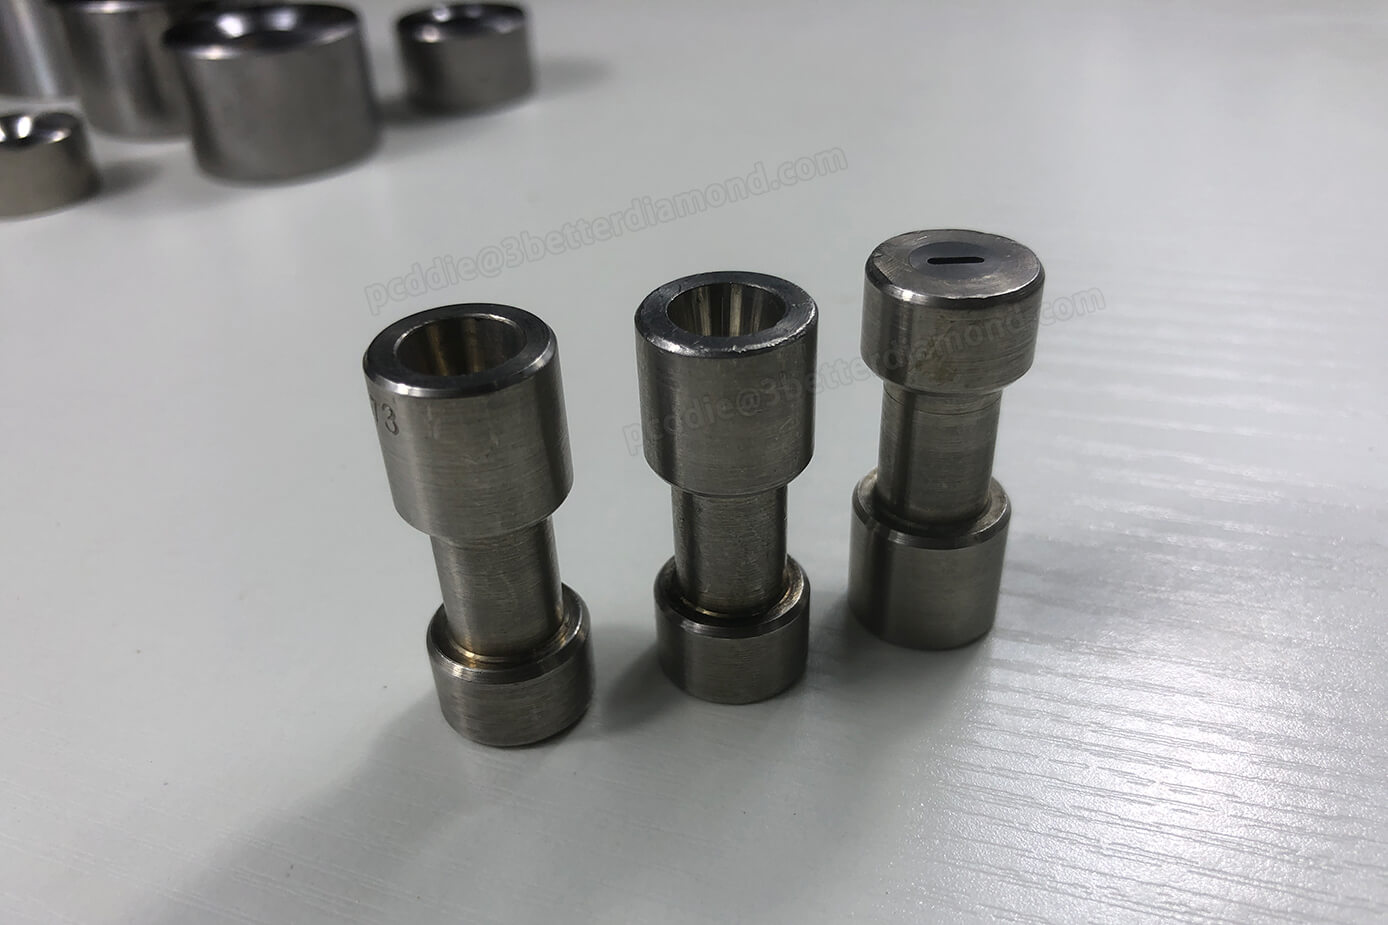 Solid Enameling Dies With Tungsten carbide inserts